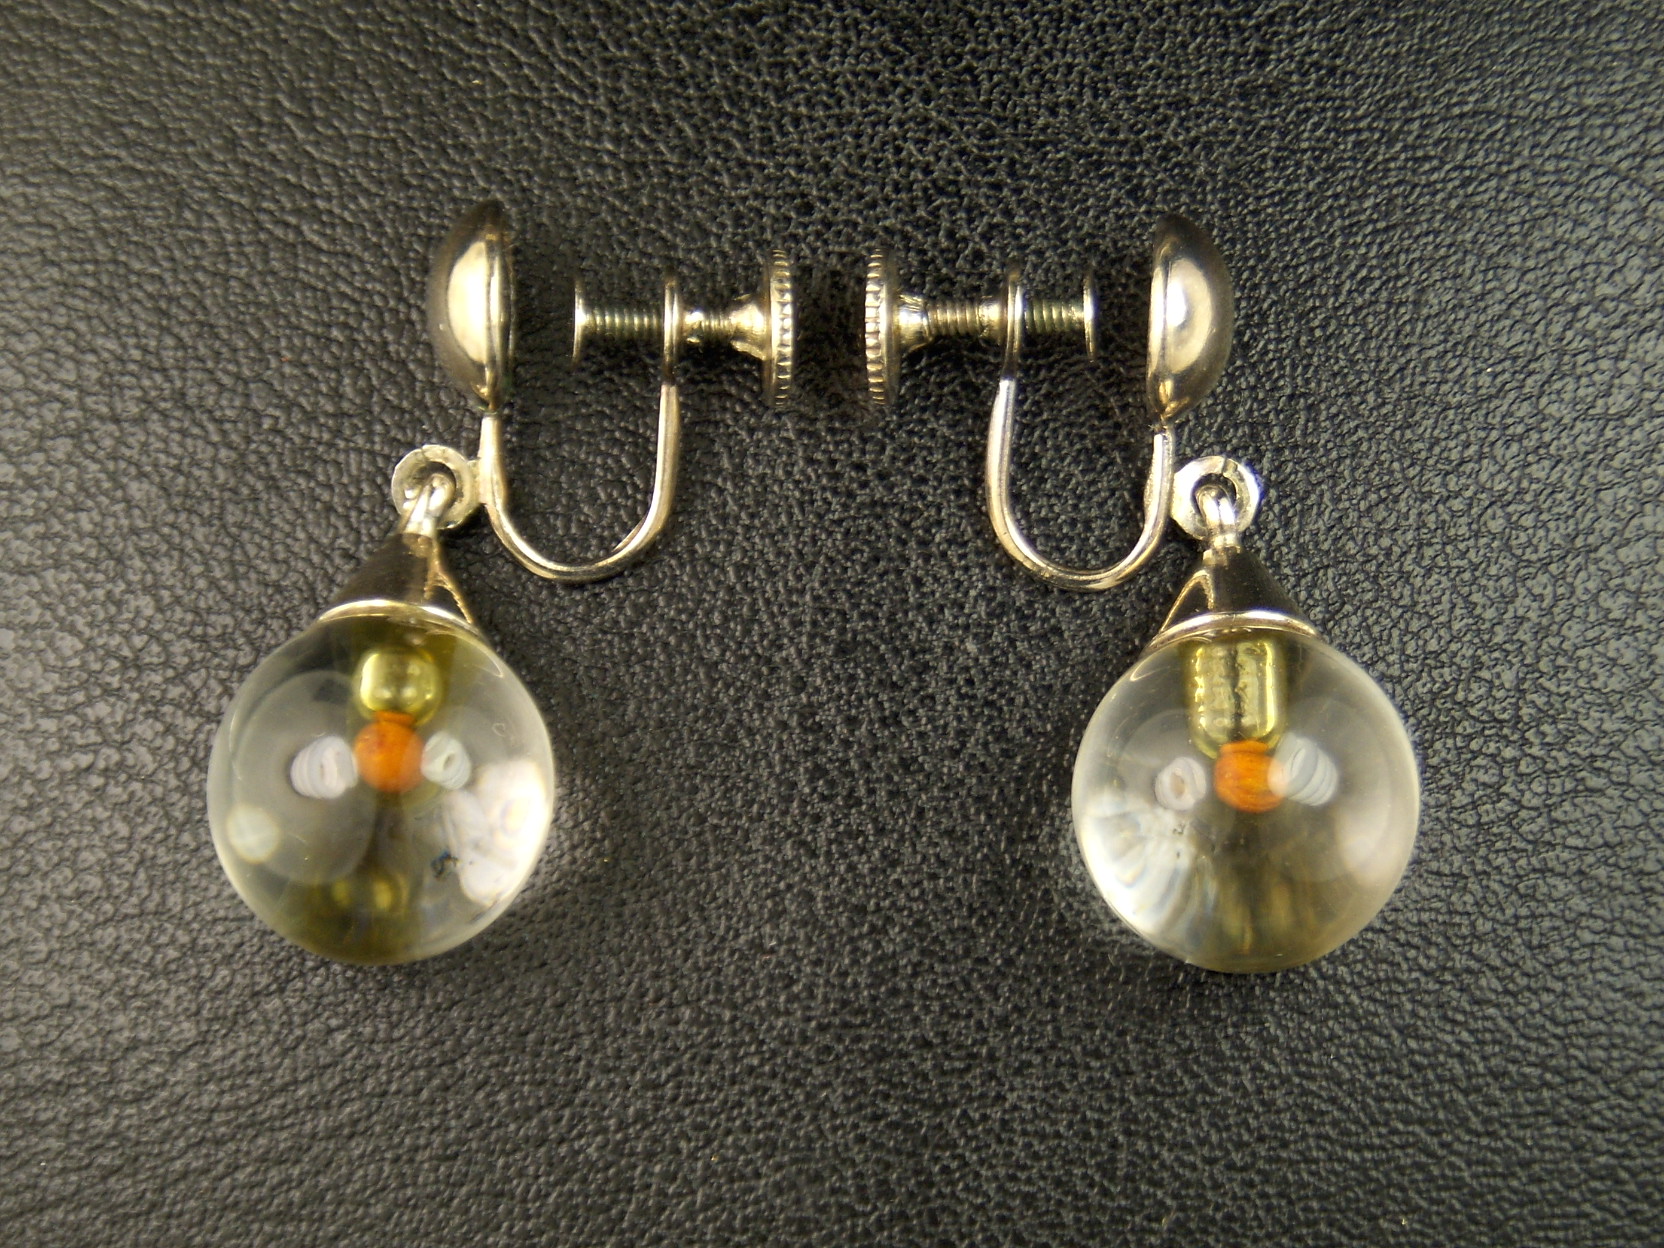 Details about   Vintage Mustard Seed Screw Back Earrings signed Coro 